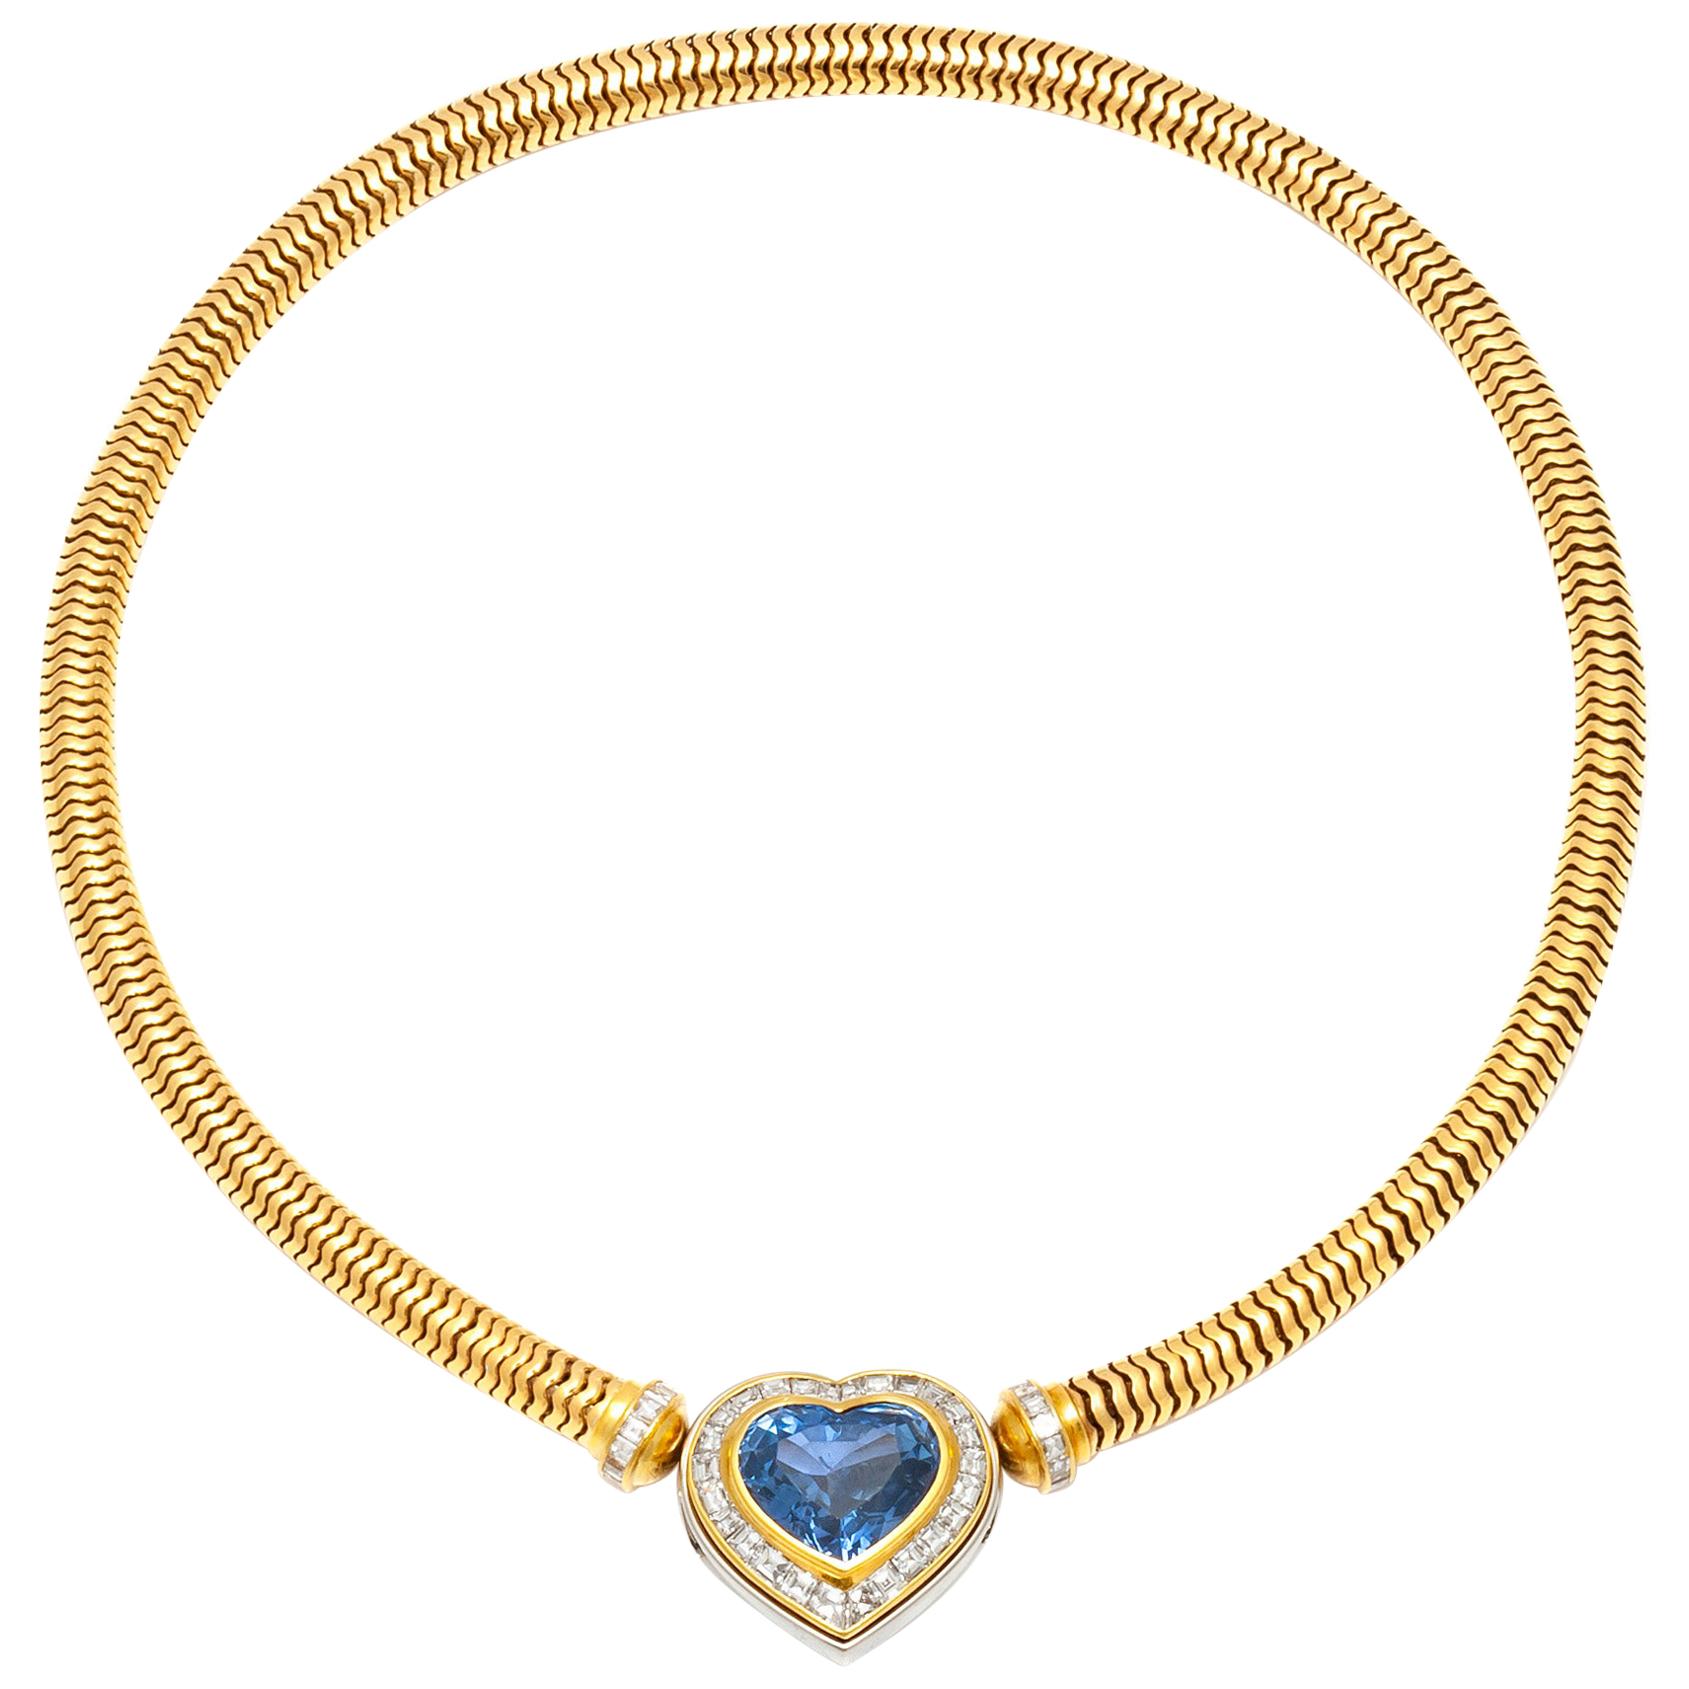 Hemmerle Sapphire and Diamonds Heart Necklace